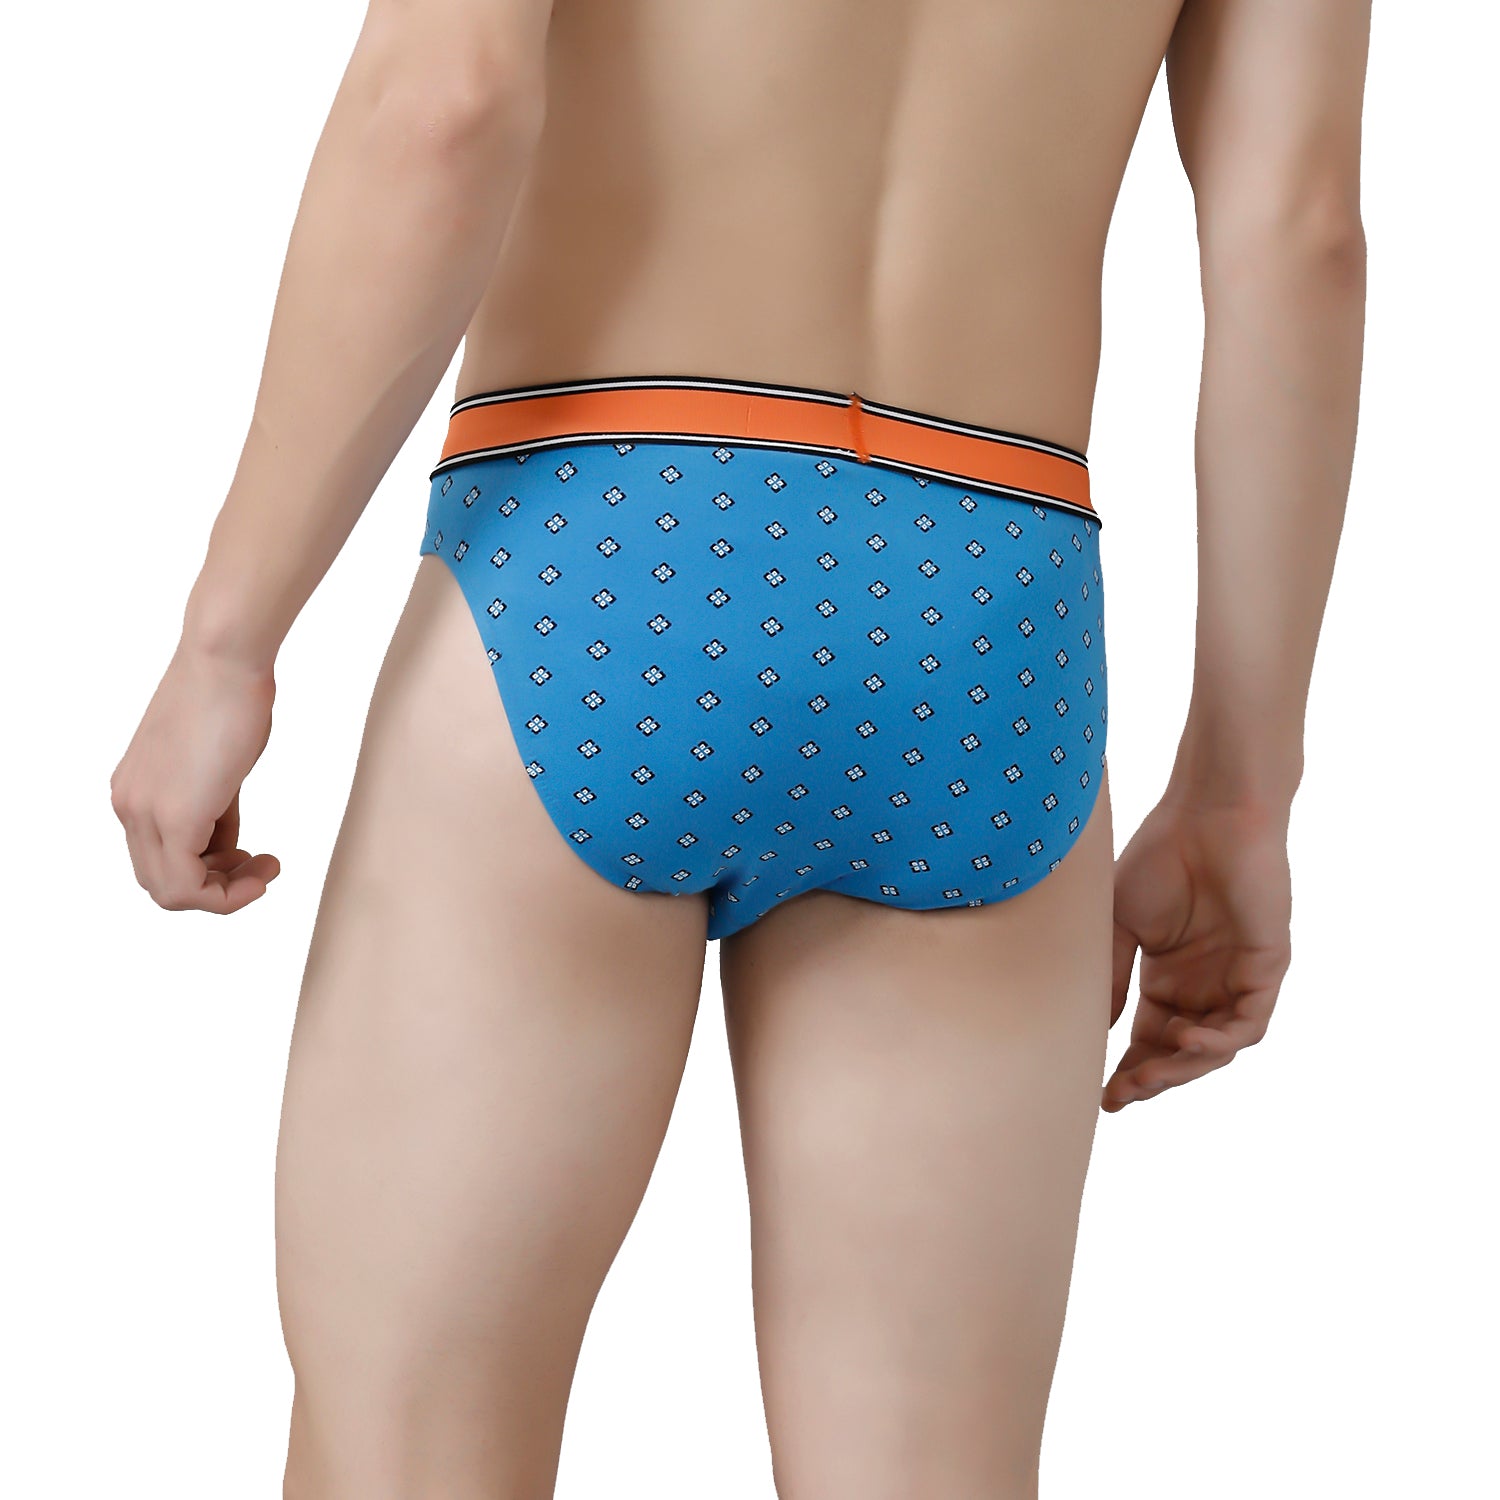 CP BRO Men's Printed Briefs with Exposed Waistband Value Pack - Blue (Pack of 2)